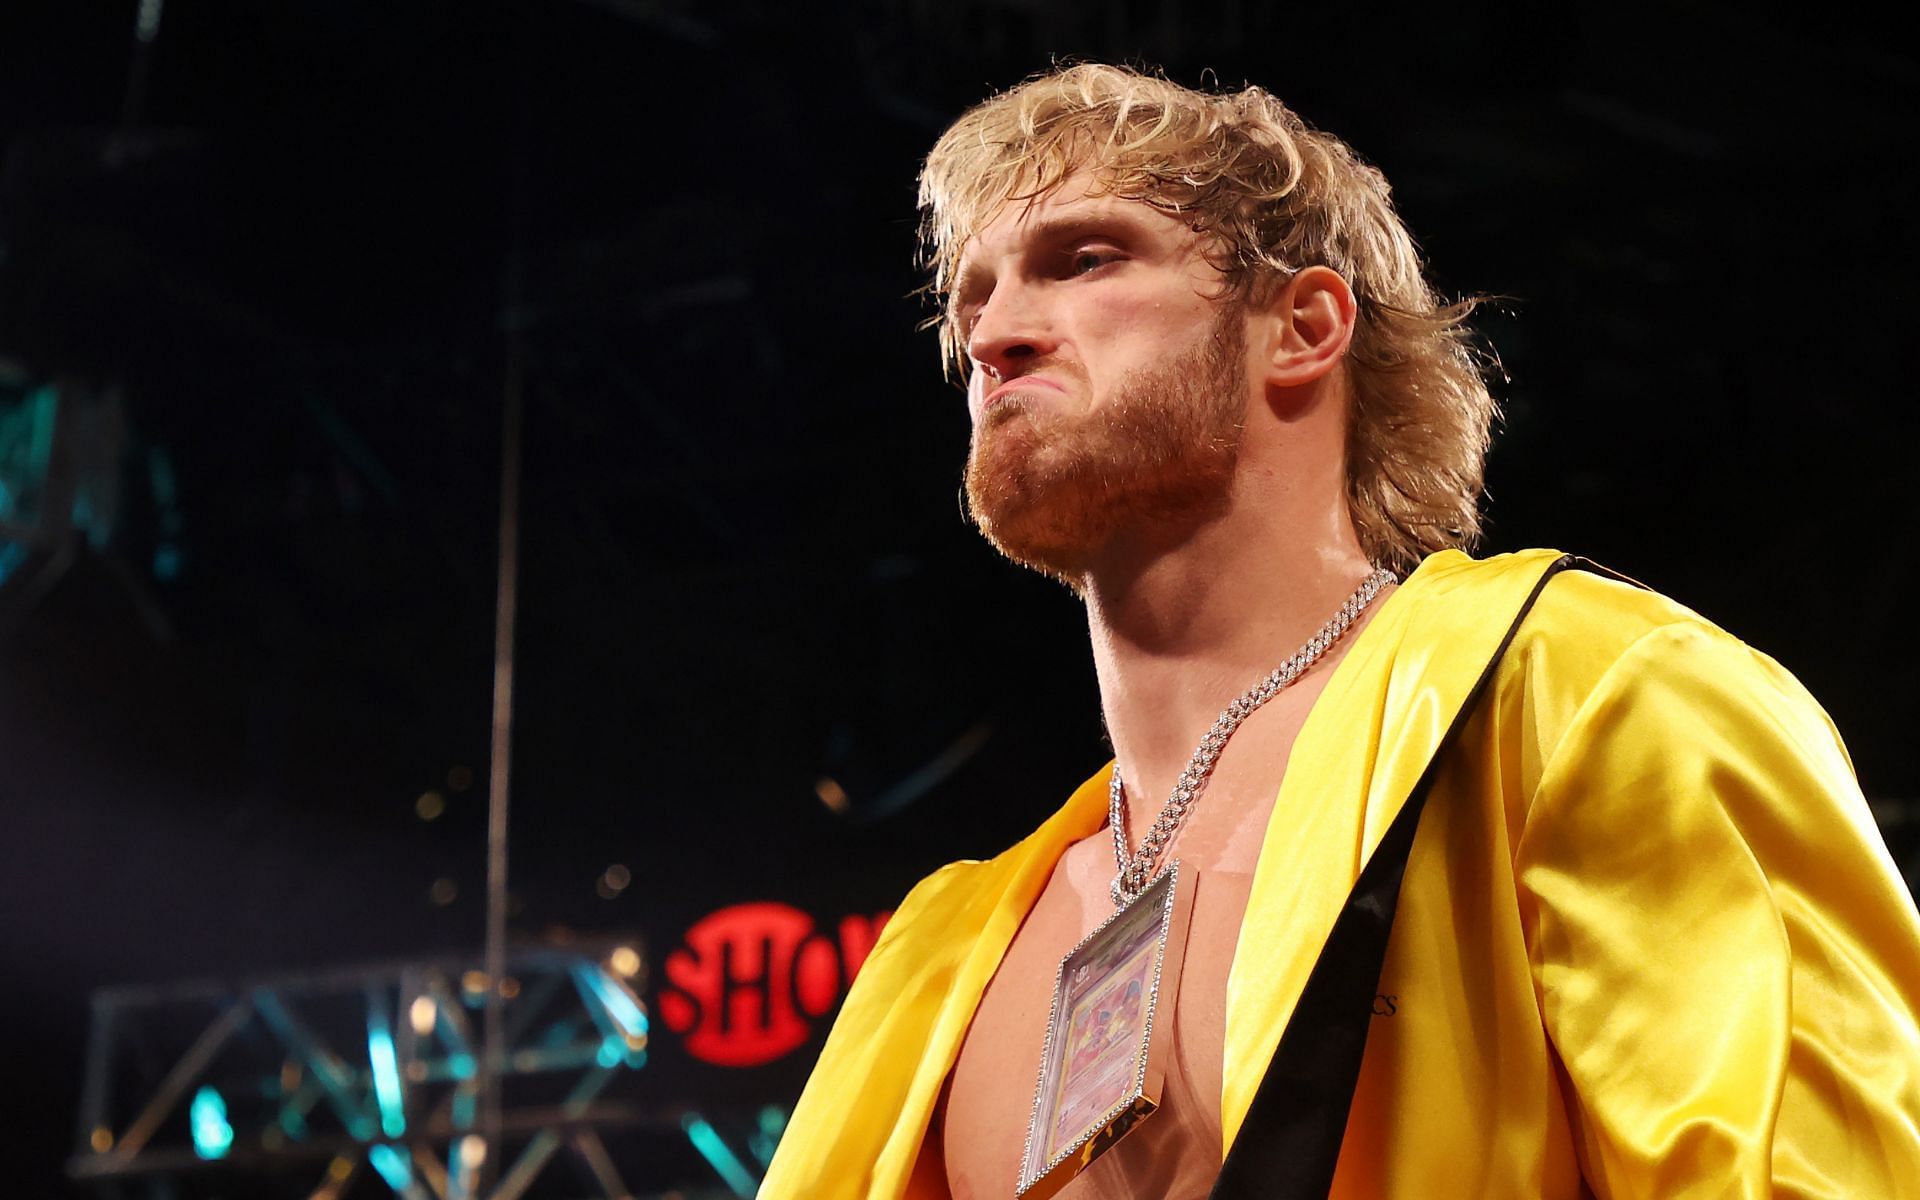 YouTuber-turned-boxer Logan Paul went through a near-death experience almost four years ago